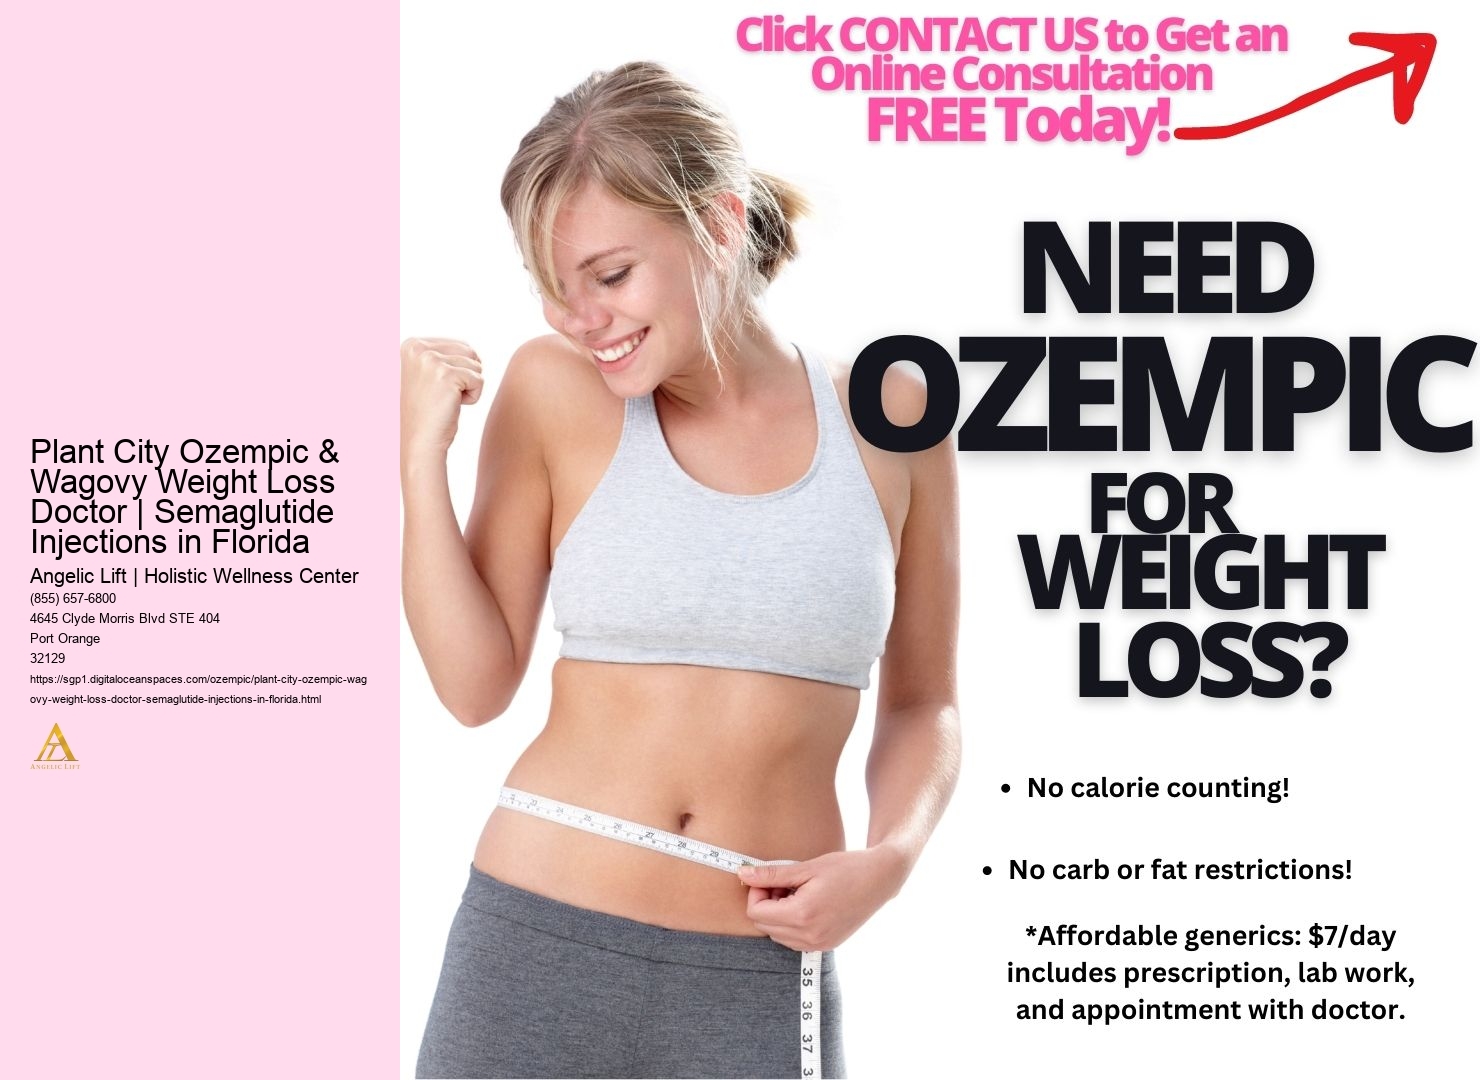 Plant City Ozempic & Wagovy Weight Loss Doctor | Semaglutide Injections in Florida